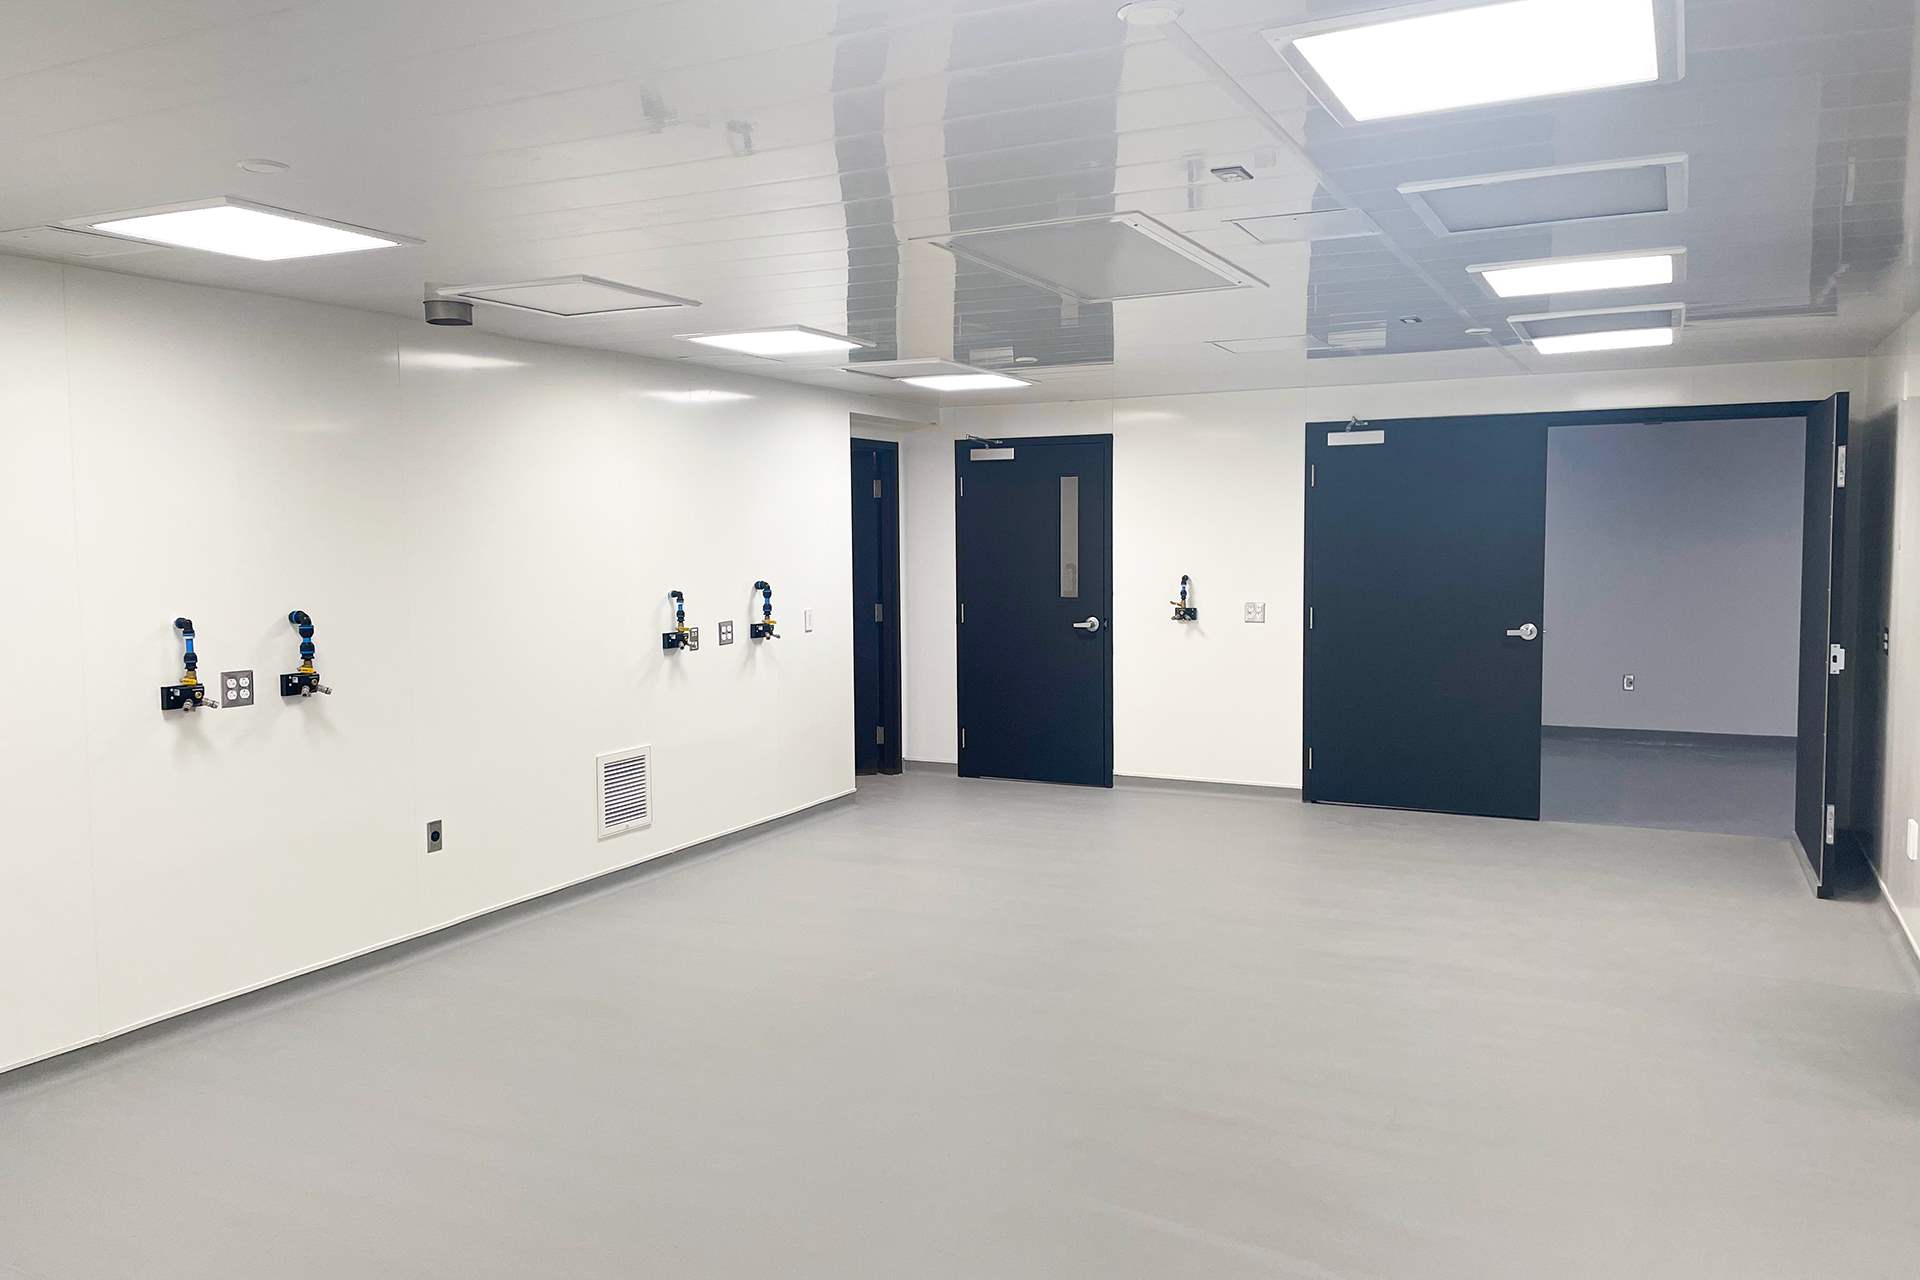 Altro floors and walls installed in pharma area